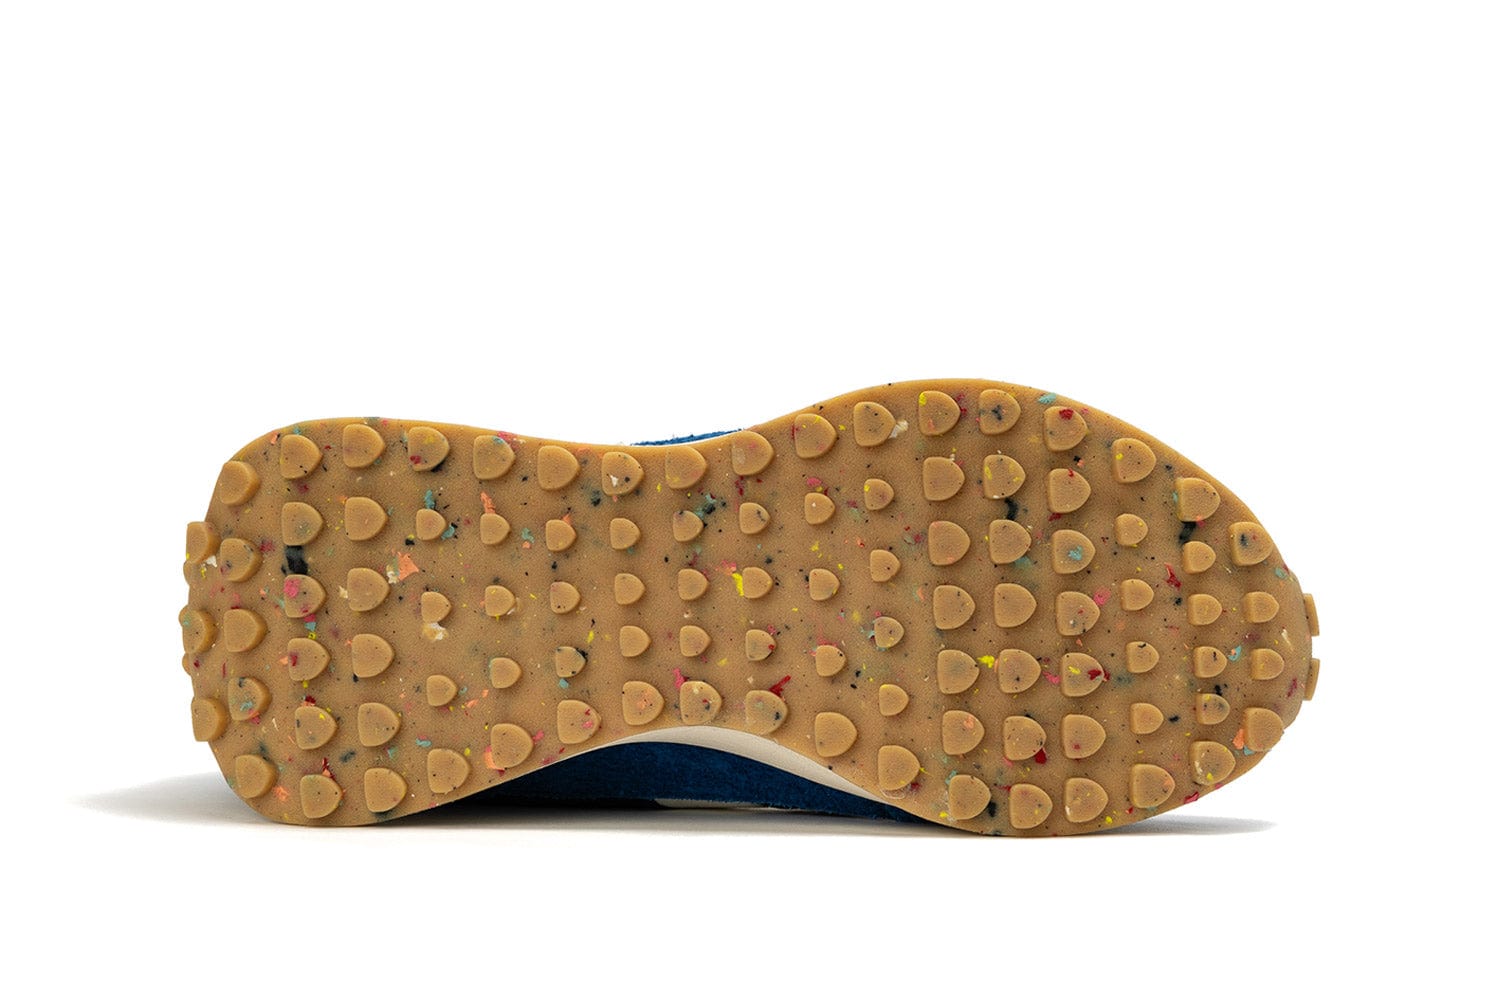 View of the sole of the Acorn Trainer in the color Varsity Blue, showcasing a recycled material sole.